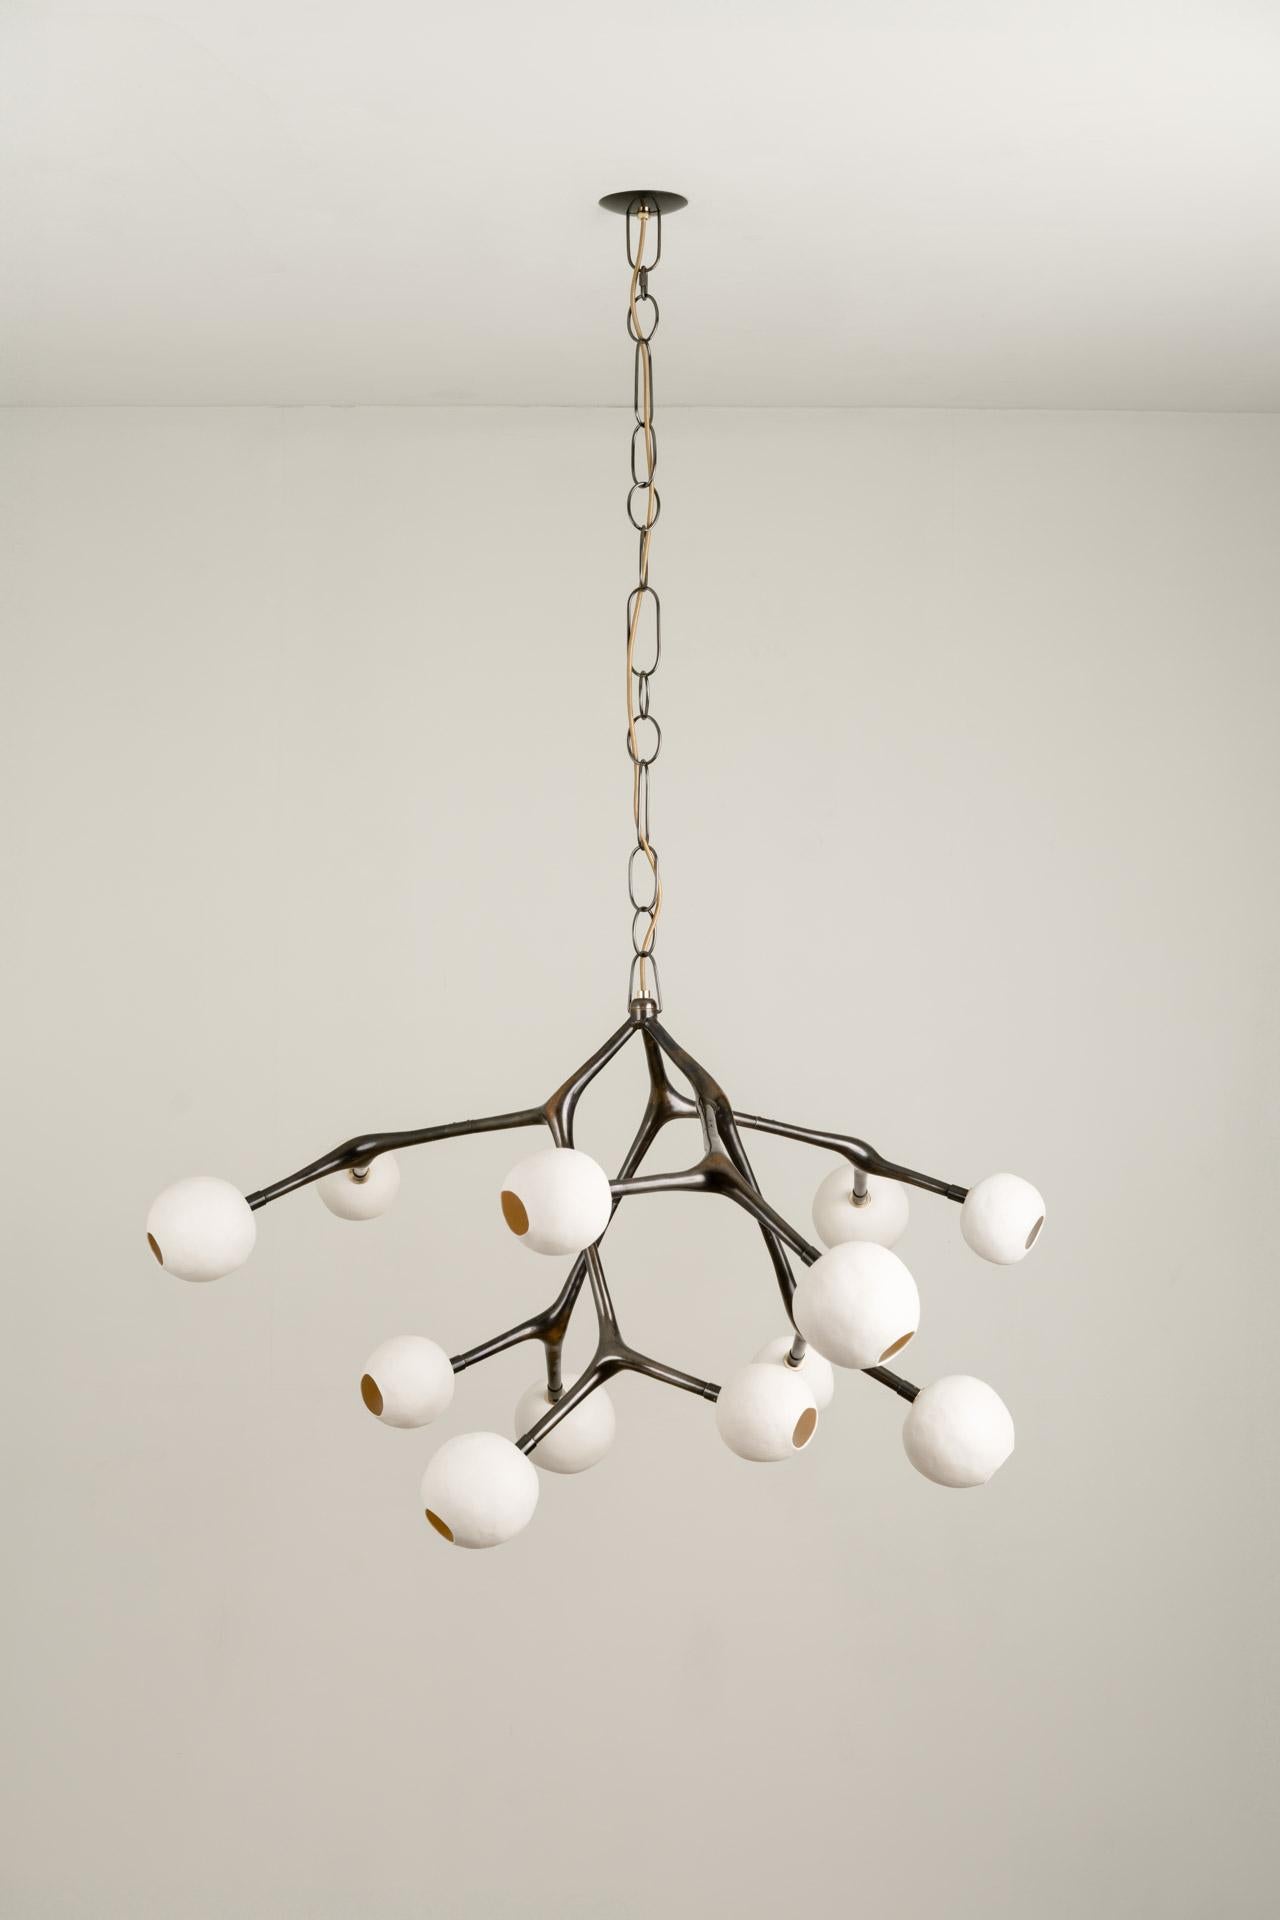 MARATUS chandelier was designed for the Mol collection by Mexican artist Isabel Moncada.

Maratus gets its name from a spider that displays an extravagant peacock-like tail to hypnotize prey with its mesmerizing pattern. In a subtly disorganized